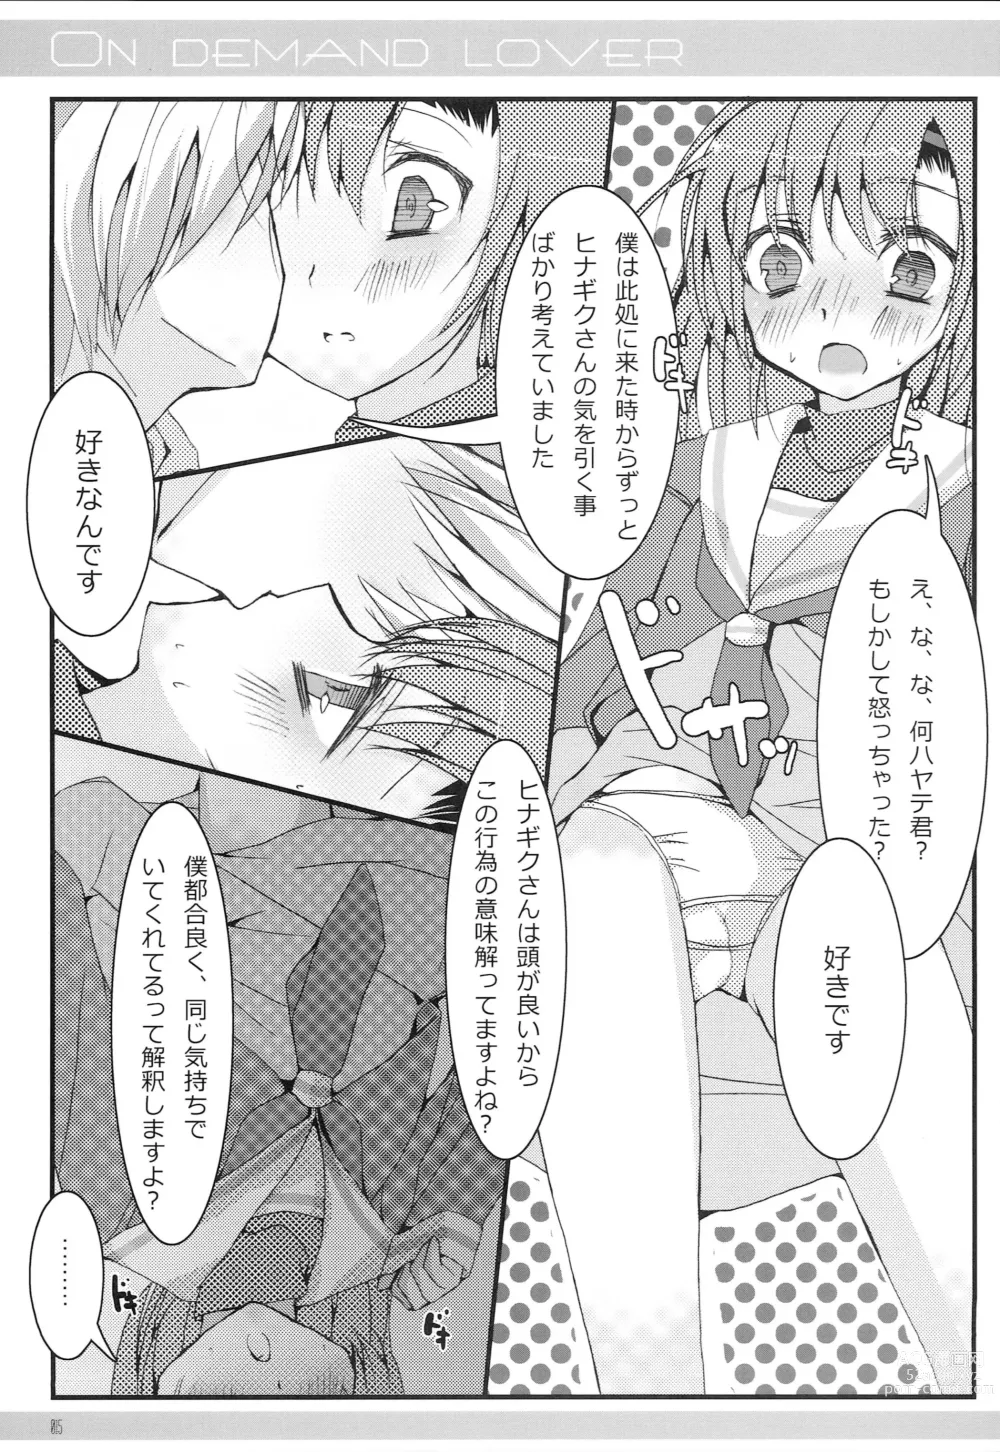 Page 13 of doujinshi ON DEMAND LOVER